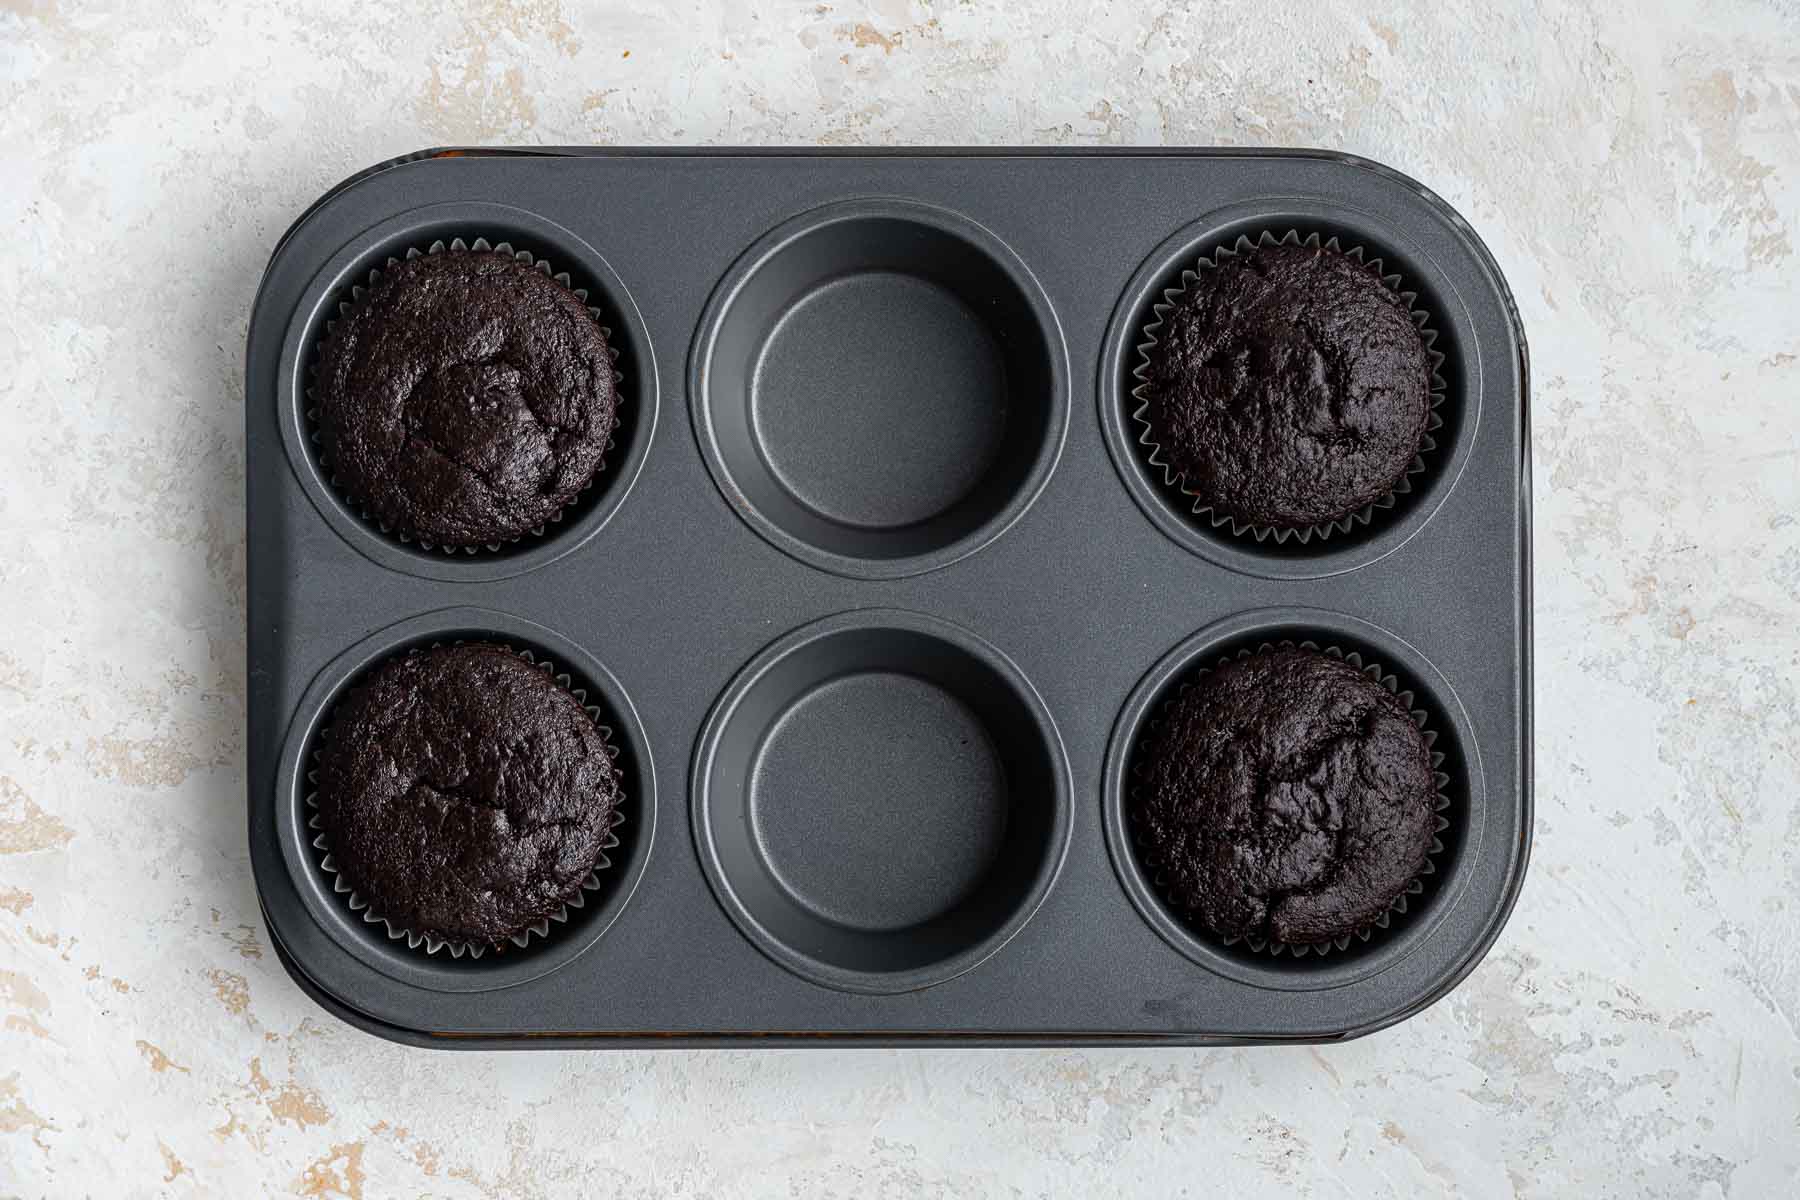 Four freshly baked chocolate cupcakes in a muffin pan.